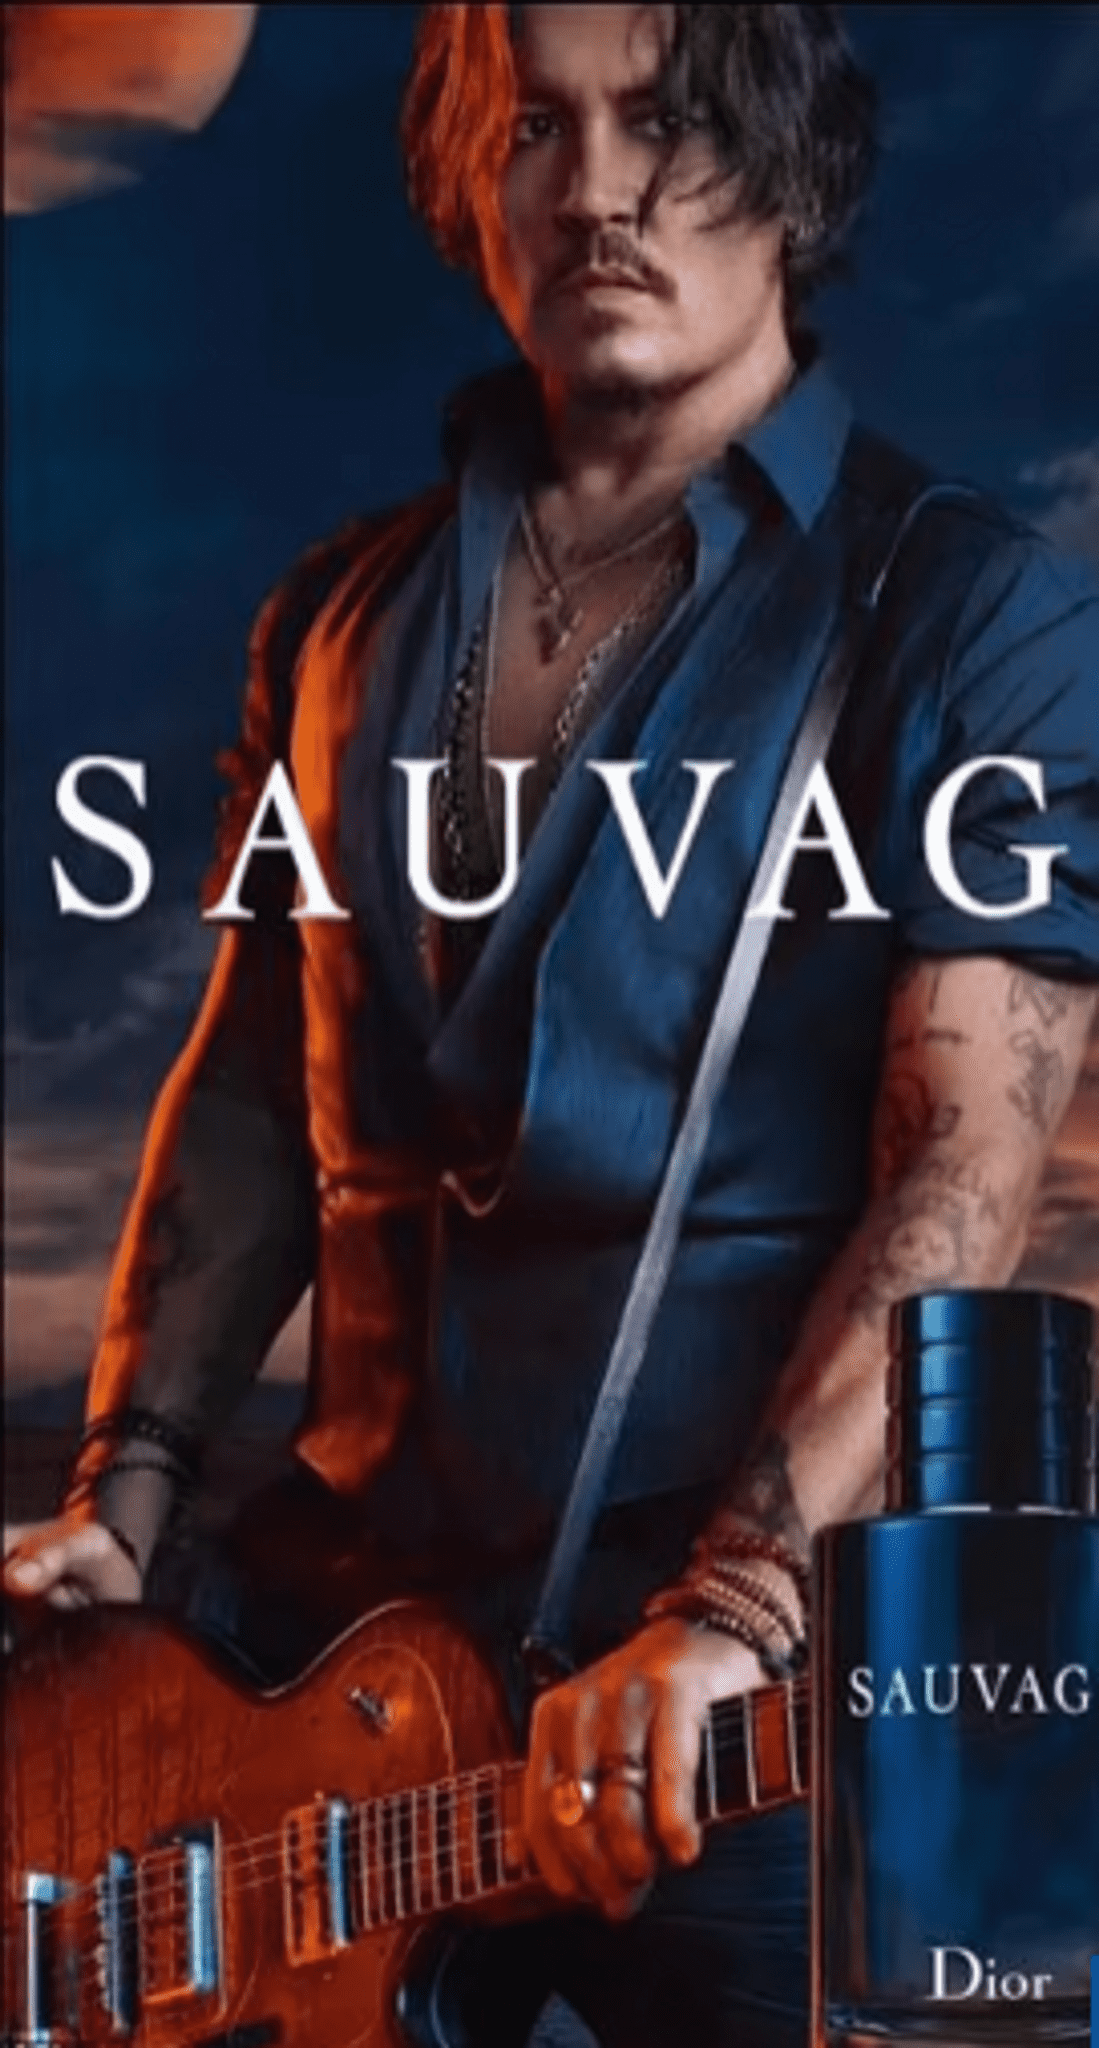 Dior brings Johnny Depp's Sauvage fragrance ad back into orbit after actor wins lawsuit against Amber Heard